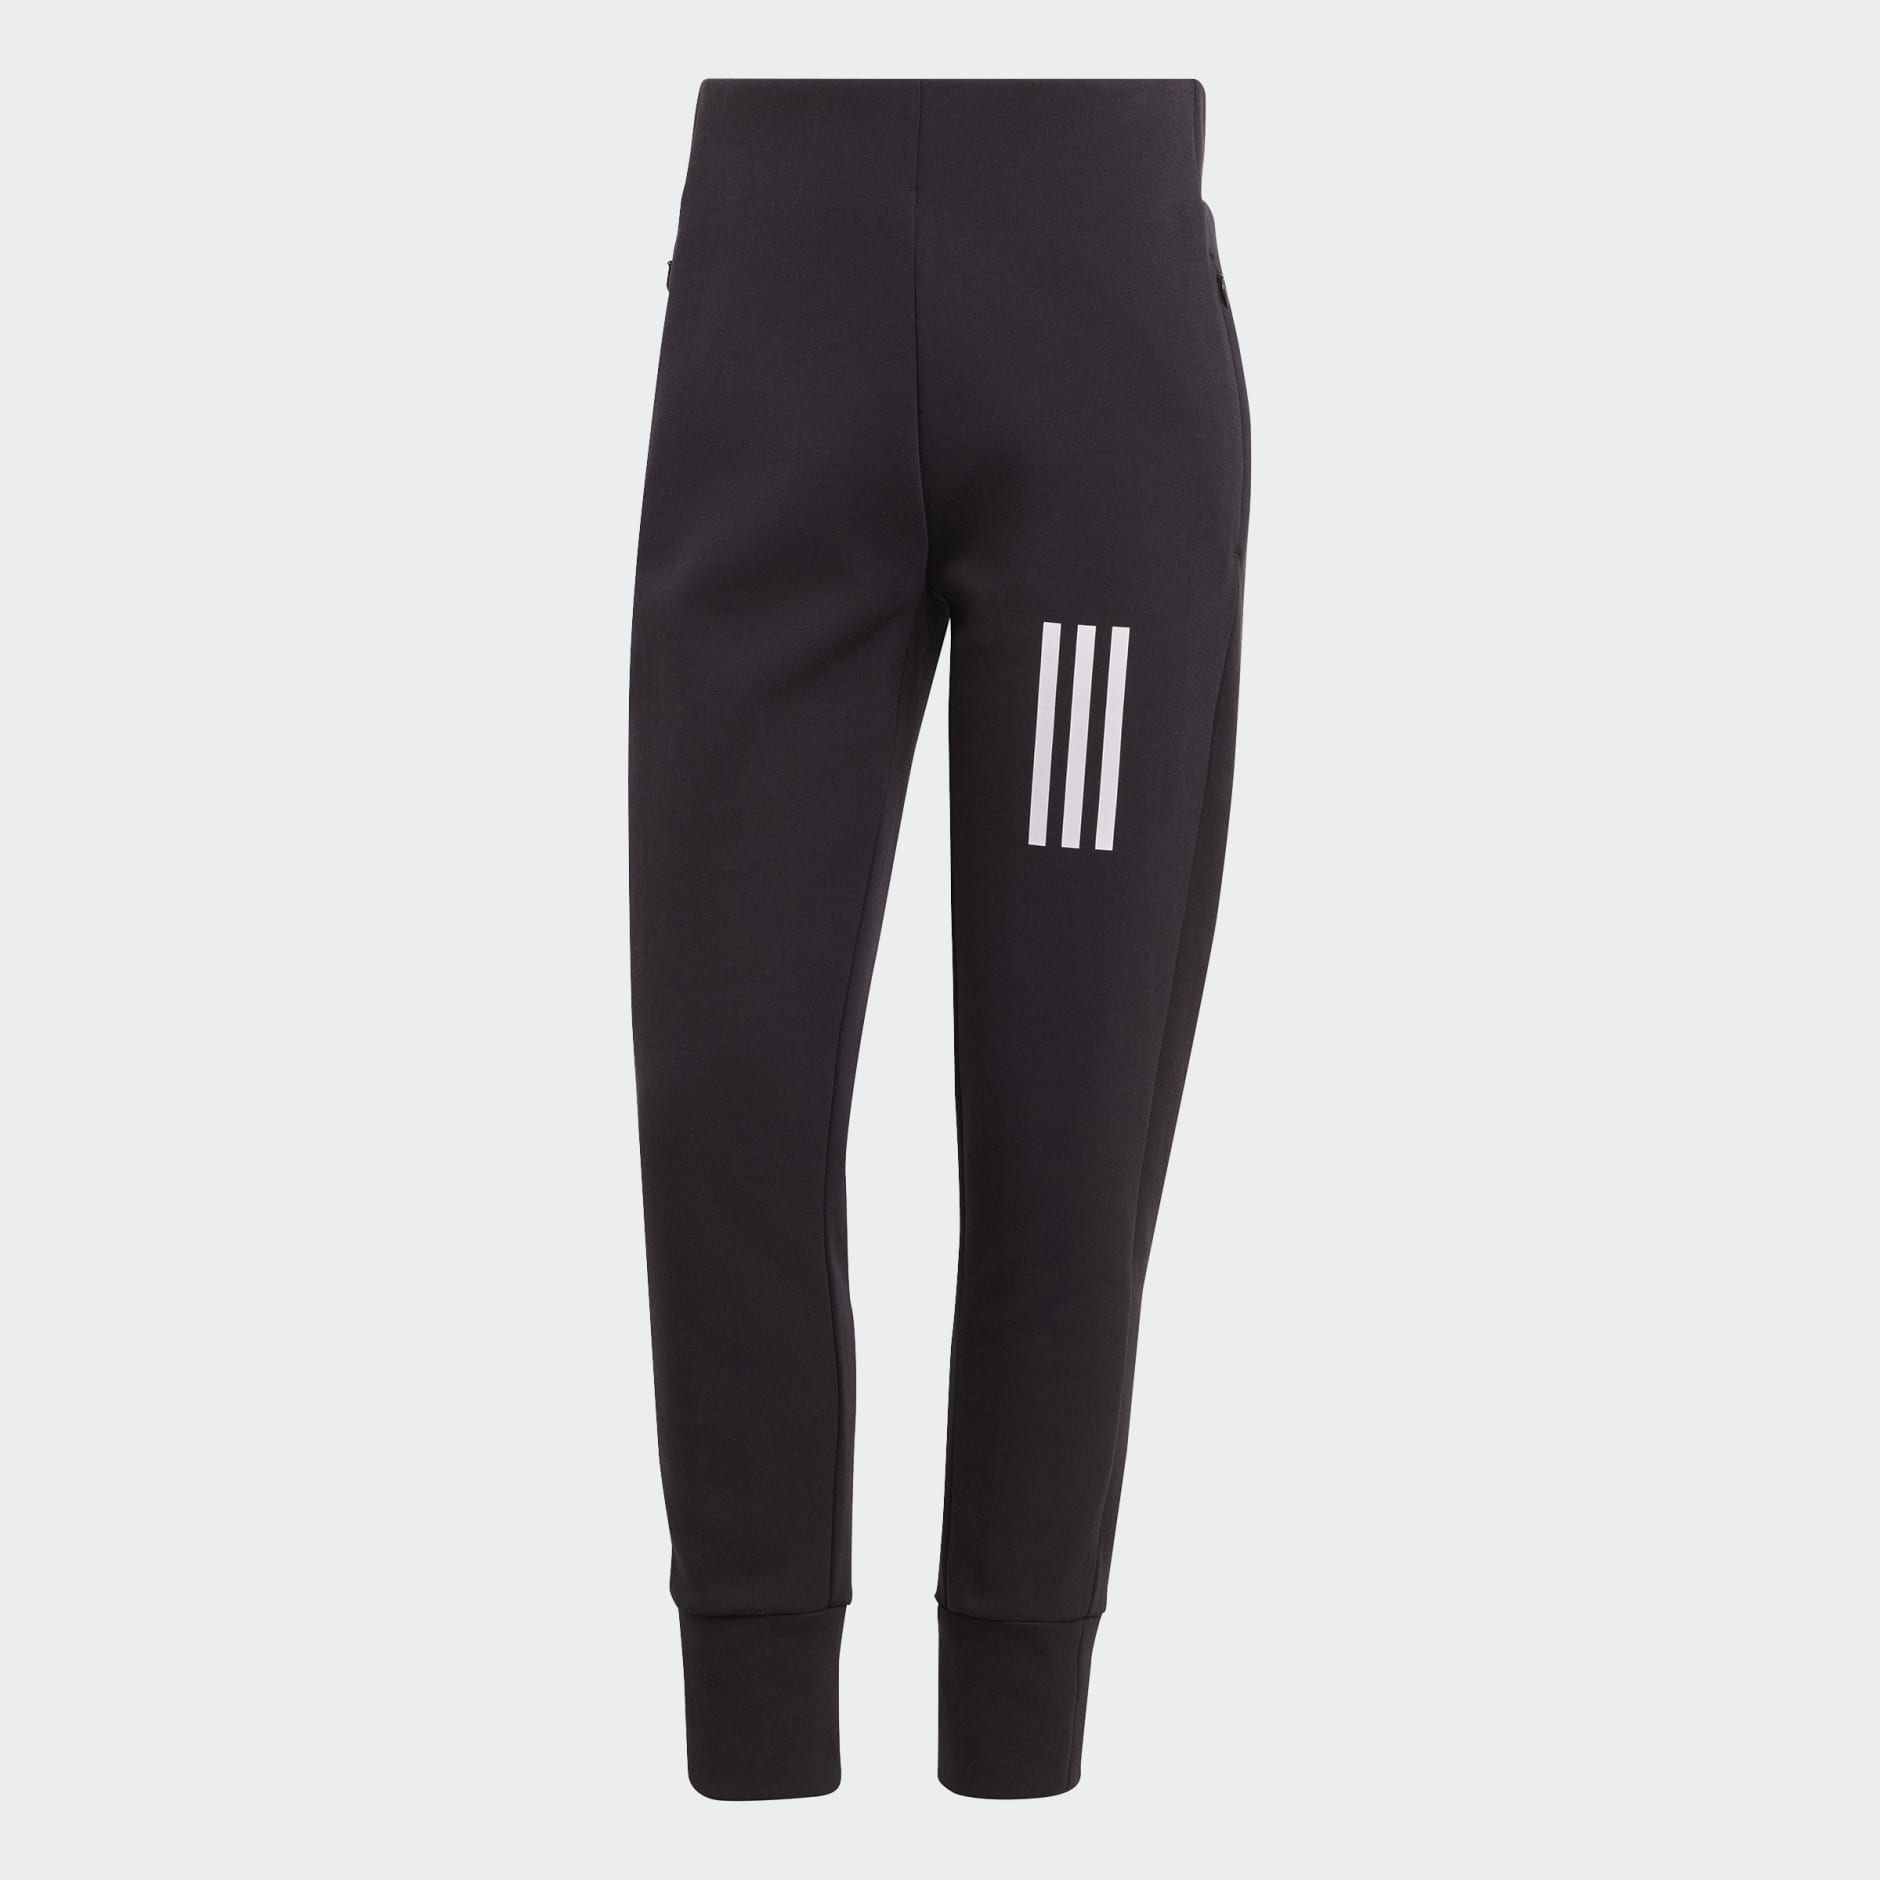 Clothing - Mission Victory High-Waist 7/8 Pants - Black | adidas South ...